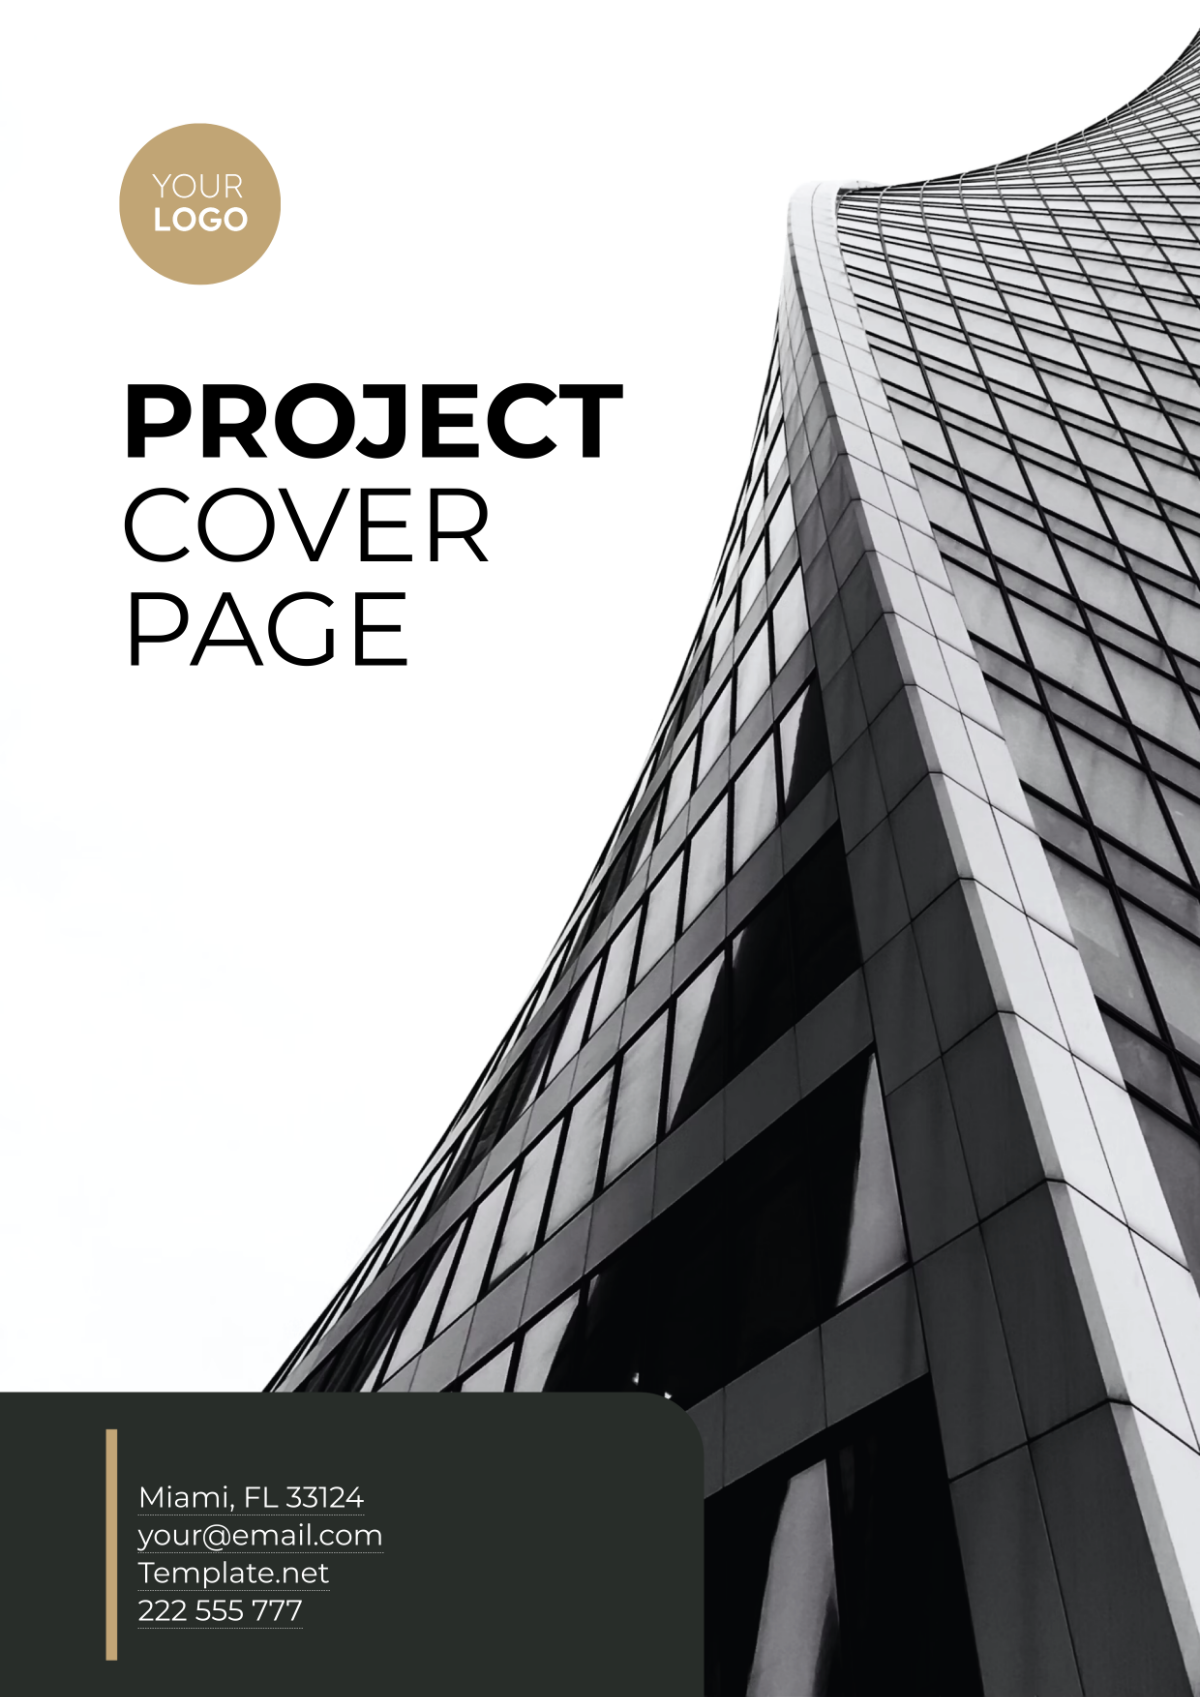 Project Cover Page Template